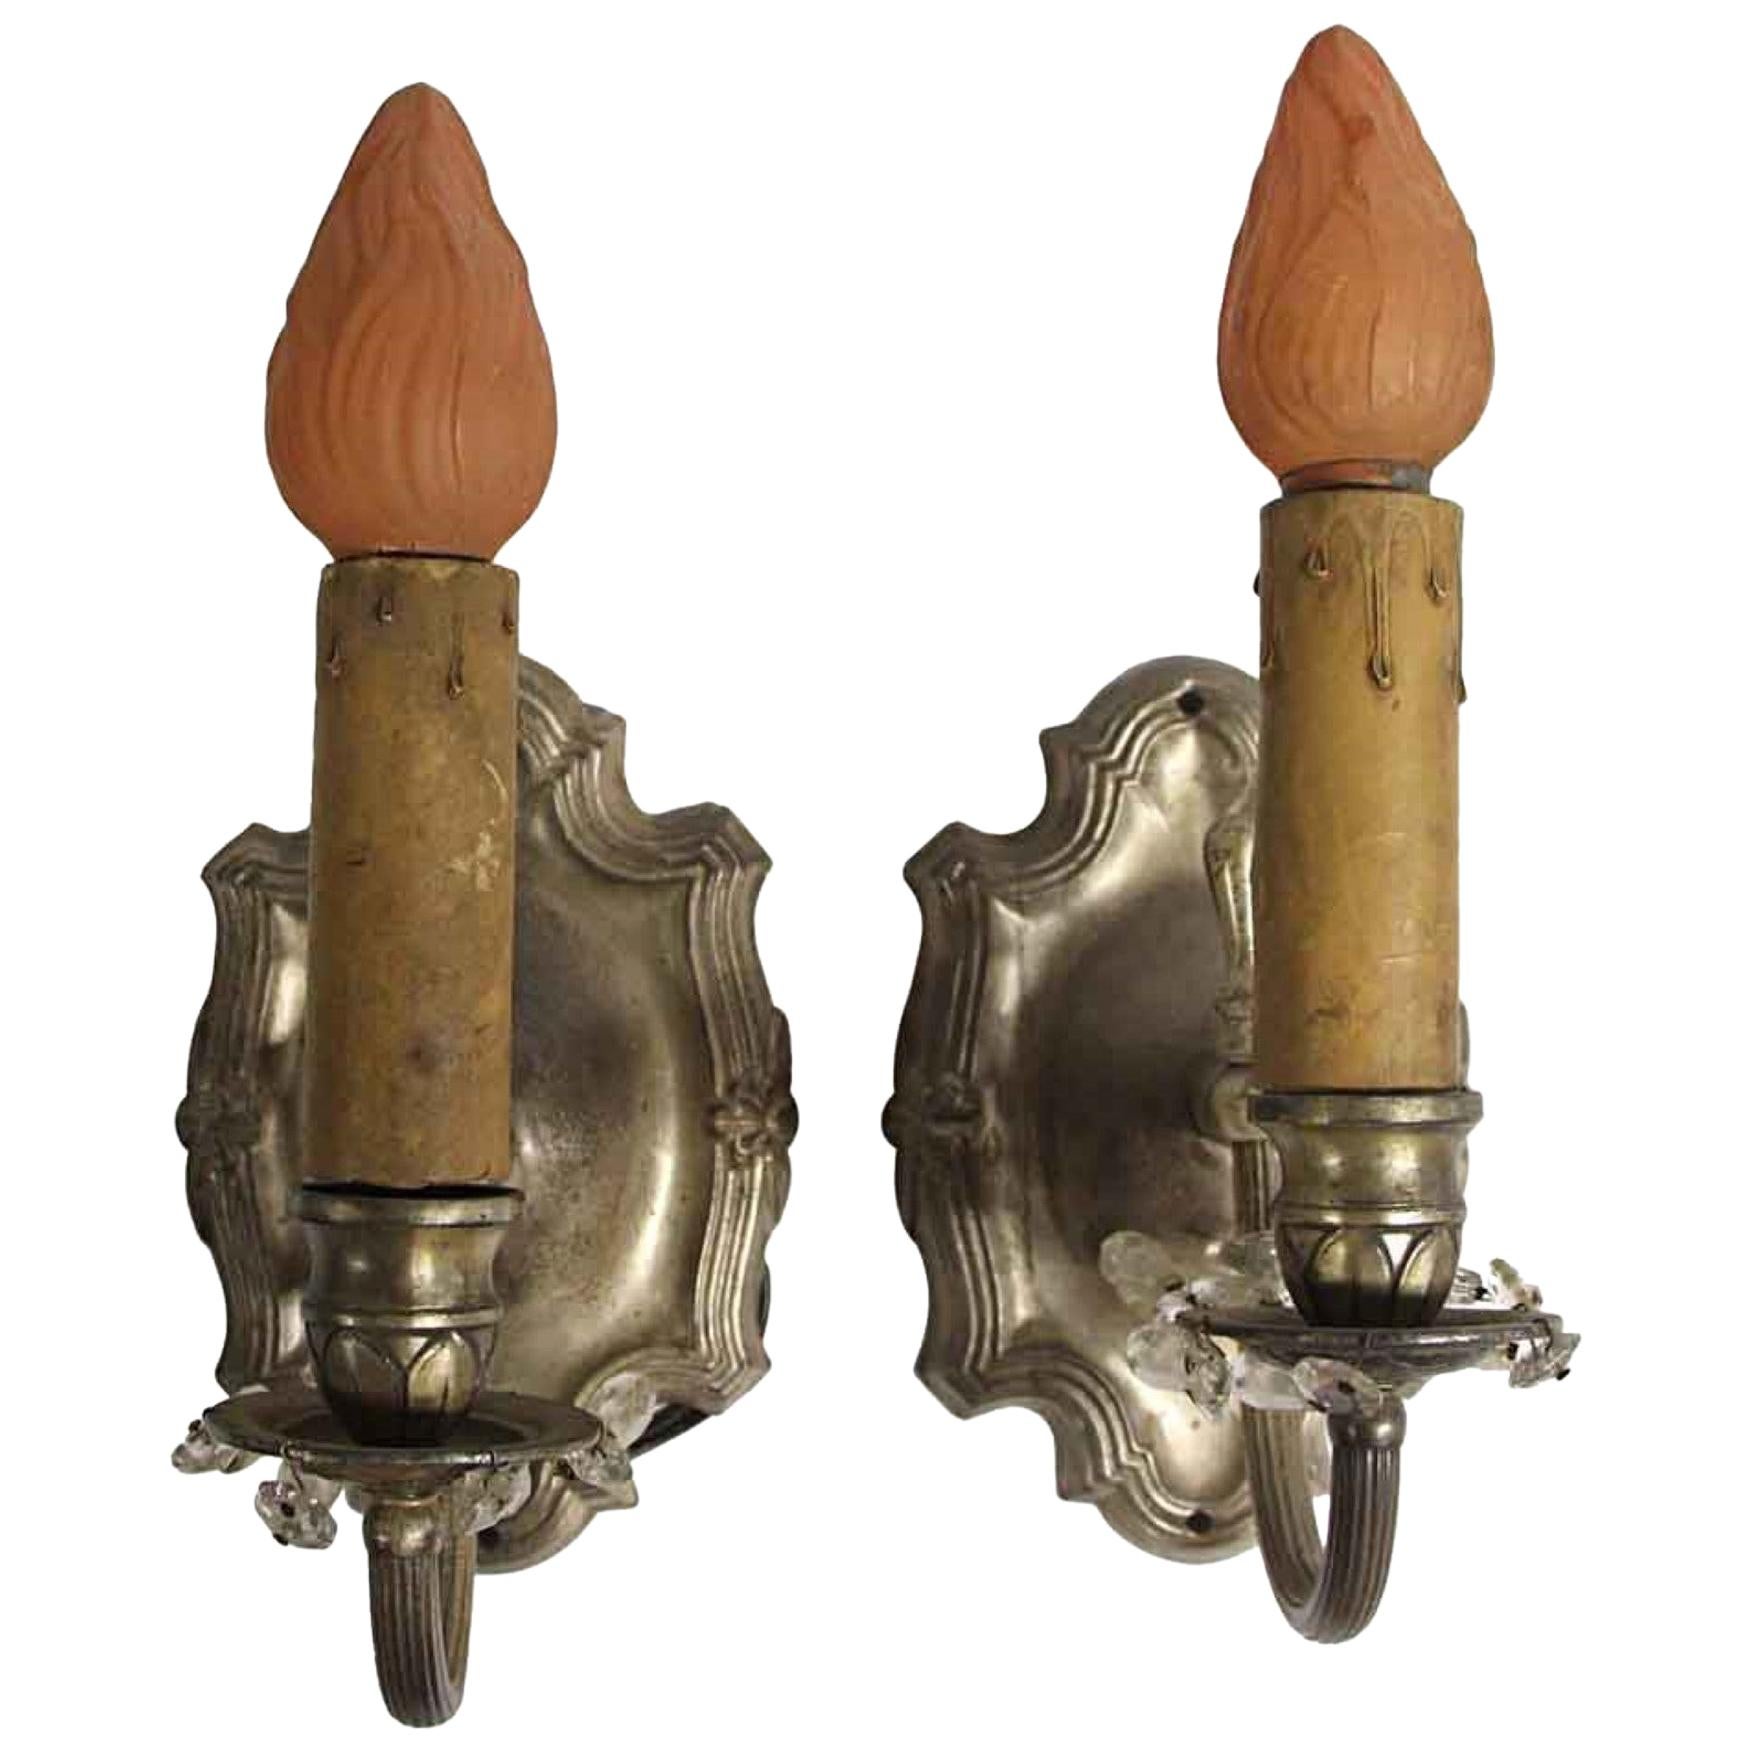 1920s Pair of Rococo Wall Sconces in Silver Finish Brass Single Light Each